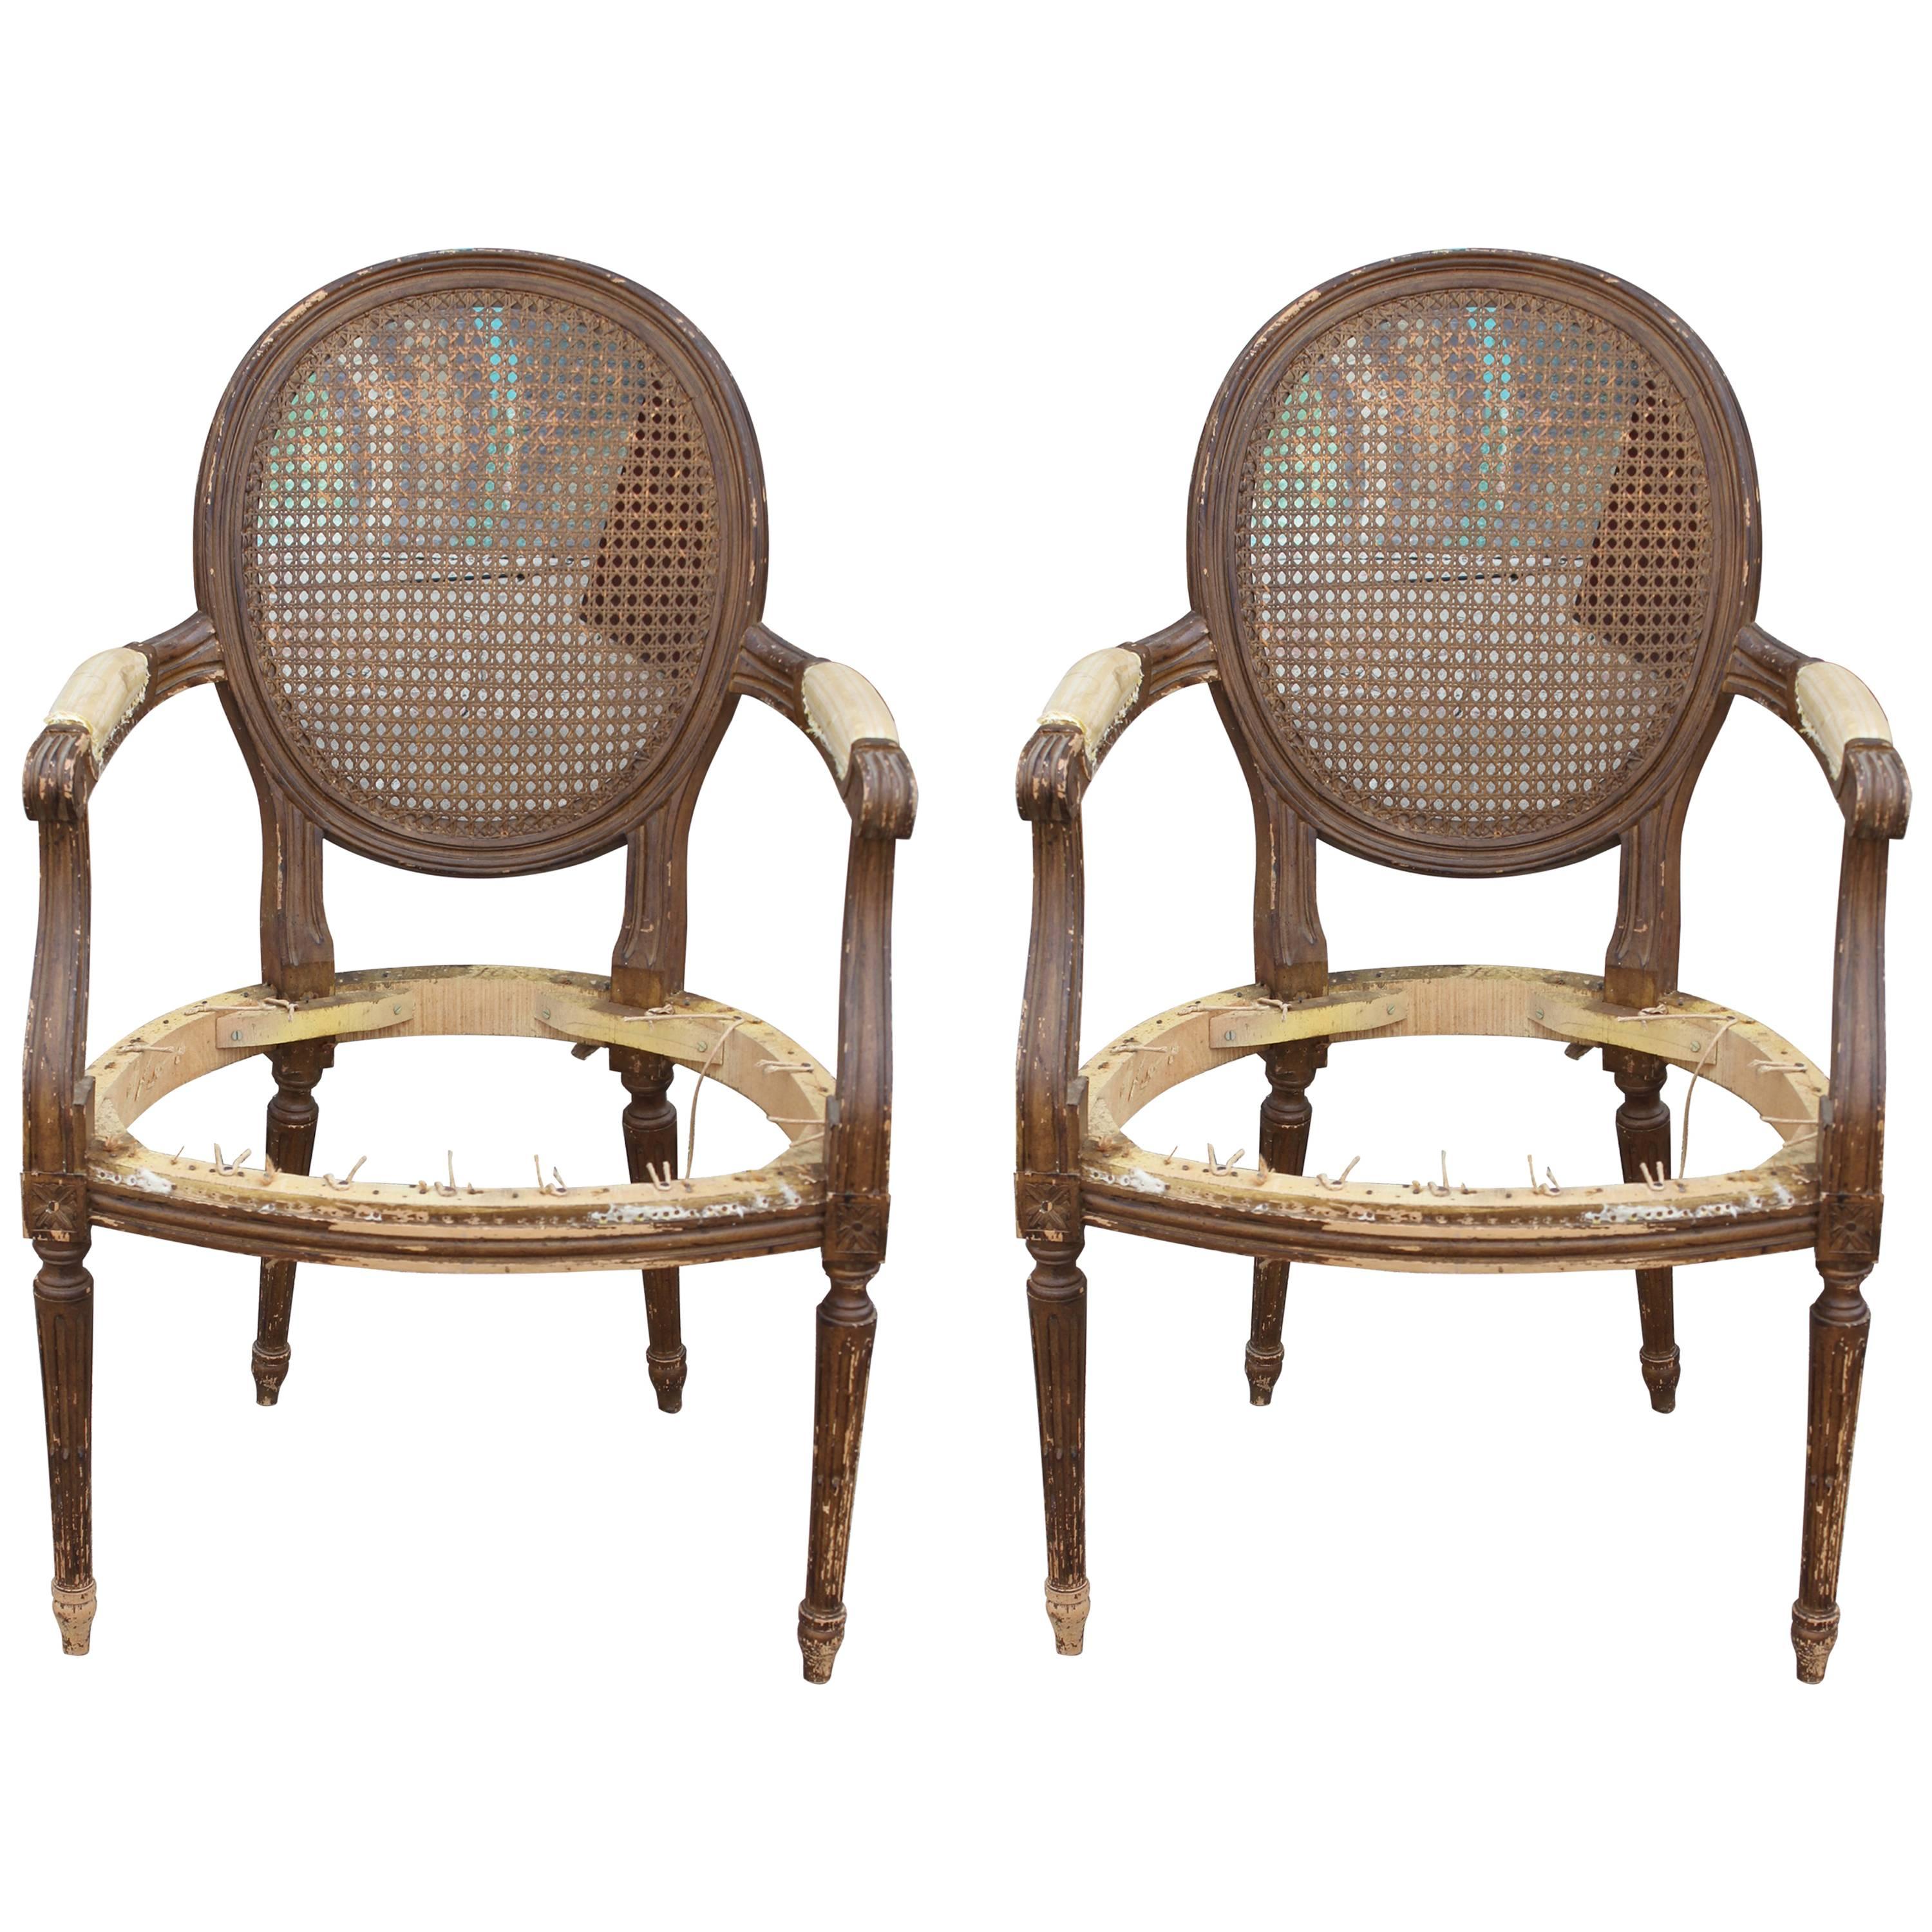 Pair of French Cane Back Stripped Lounge Chair Frames